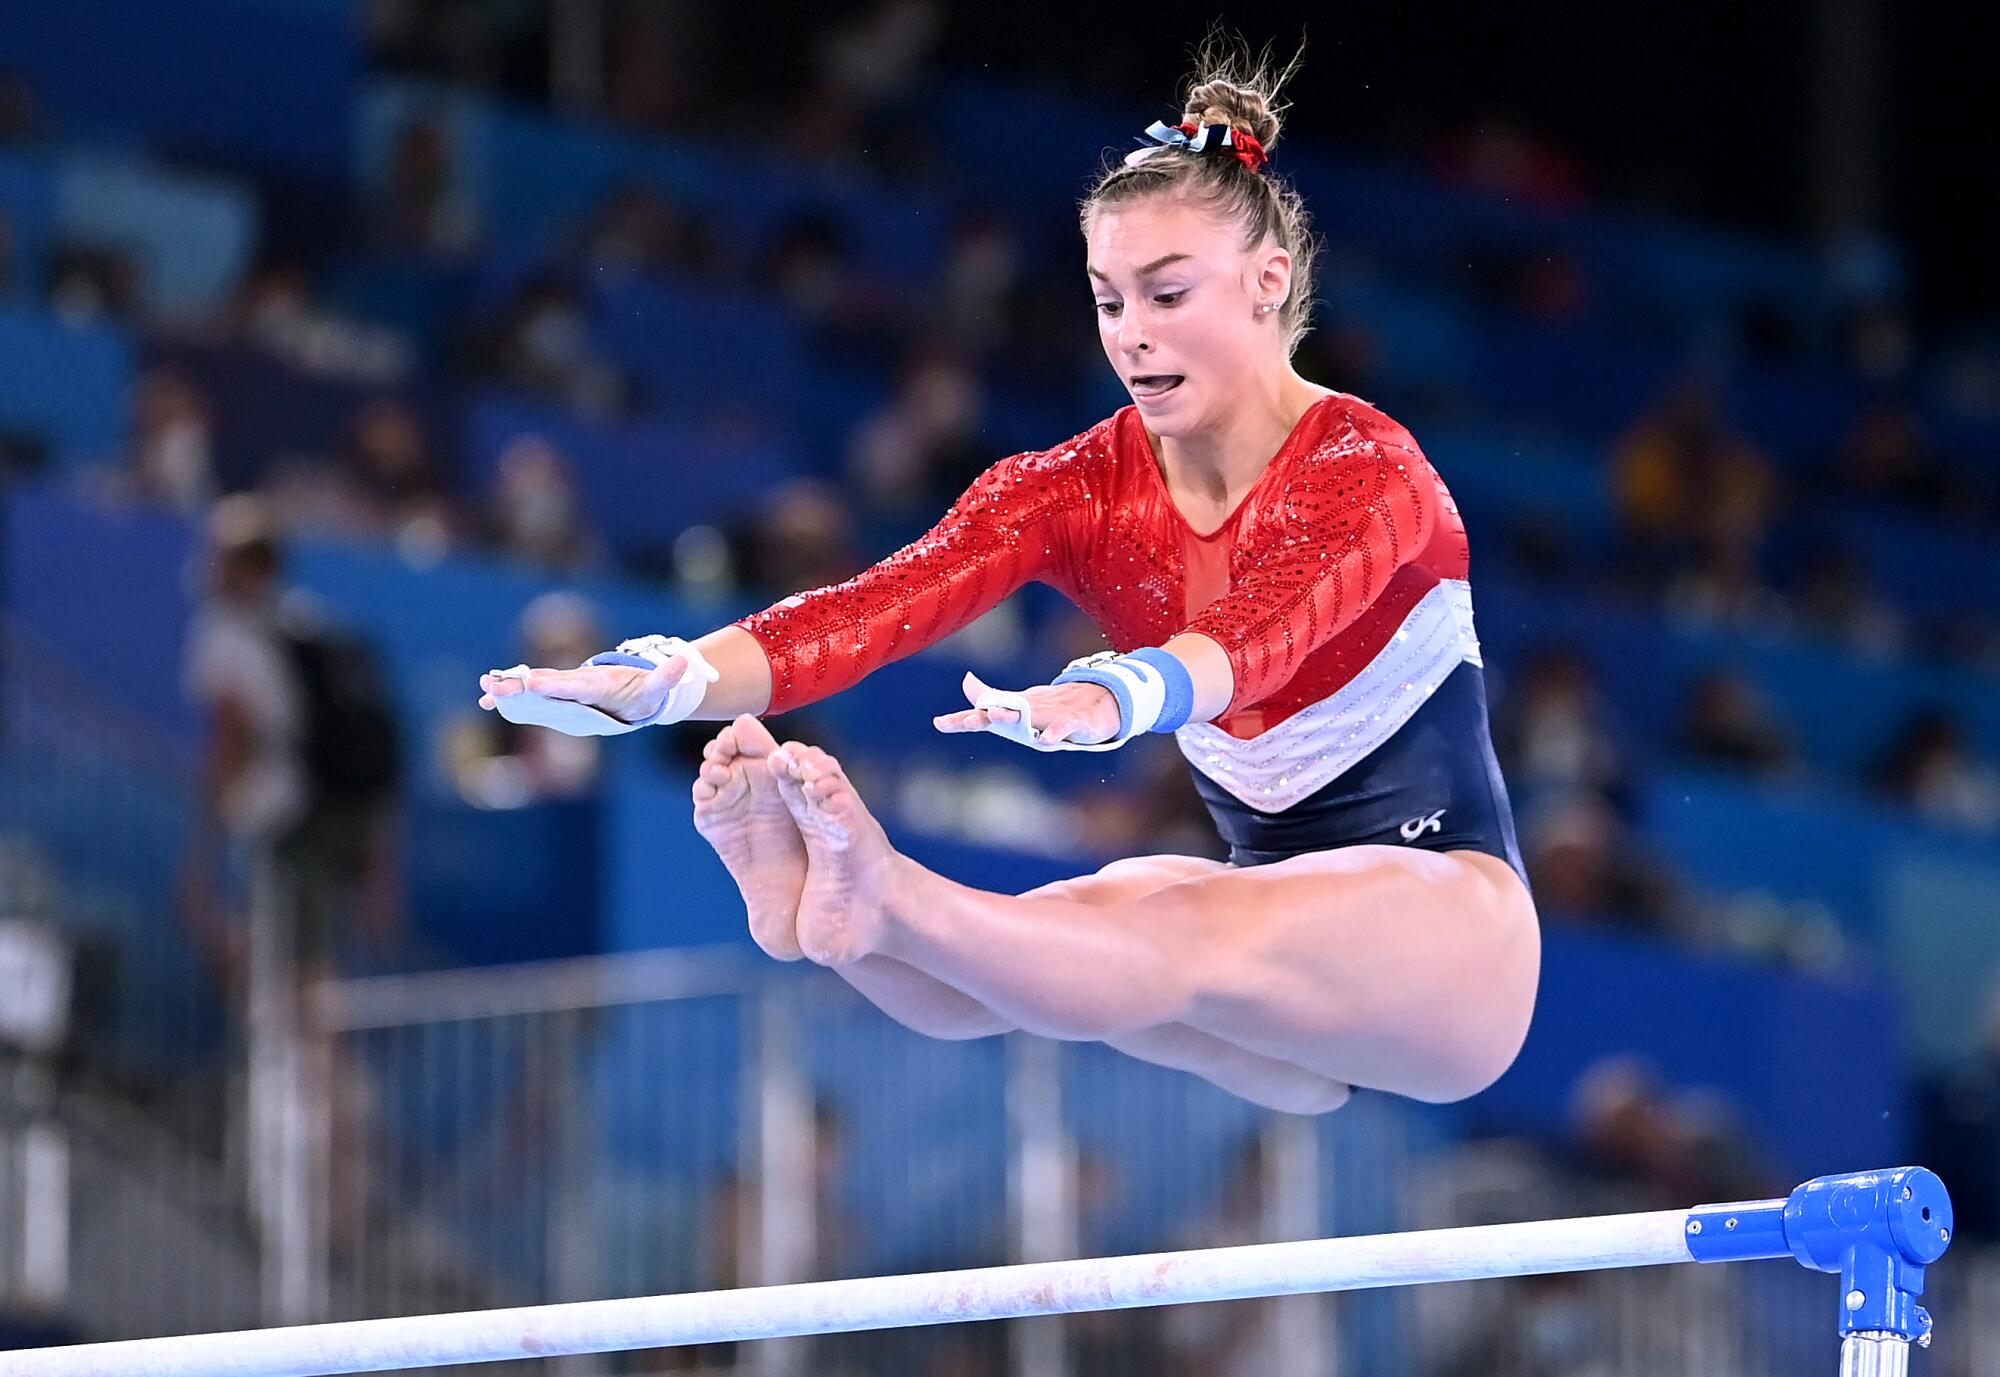 U.S. gymnast Grace McCallum competes on the uneven parallel bars in the women's team final.